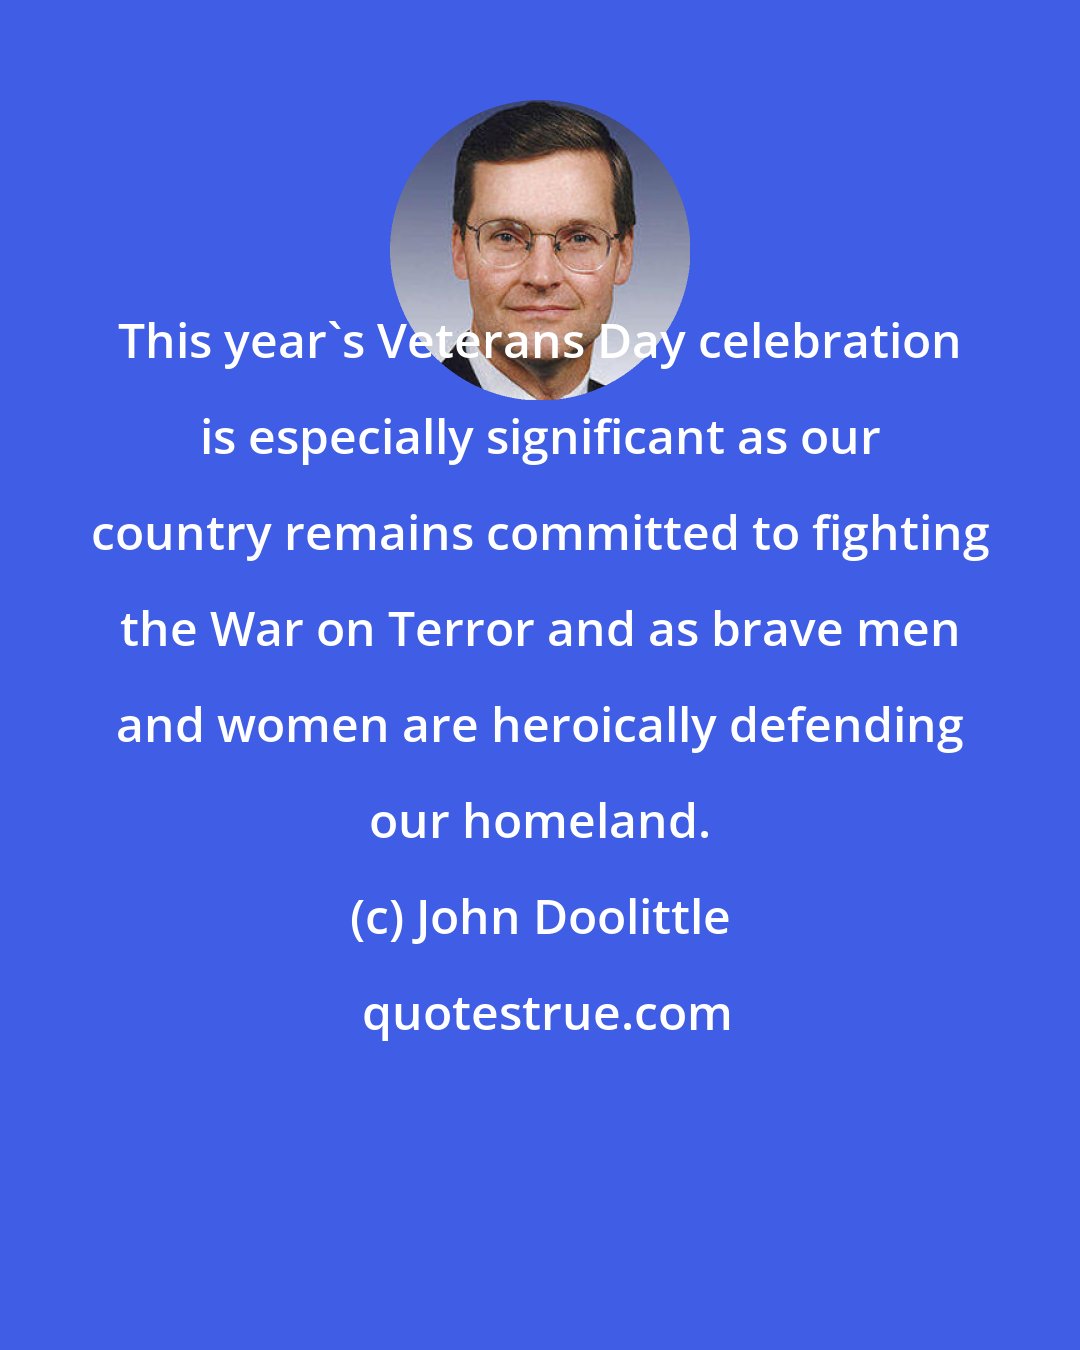 John Doolittle: This year's Veterans Day celebration is especially significant as our country remains committed to fighting the War on Terror and as brave men and women are heroically defending our homeland.